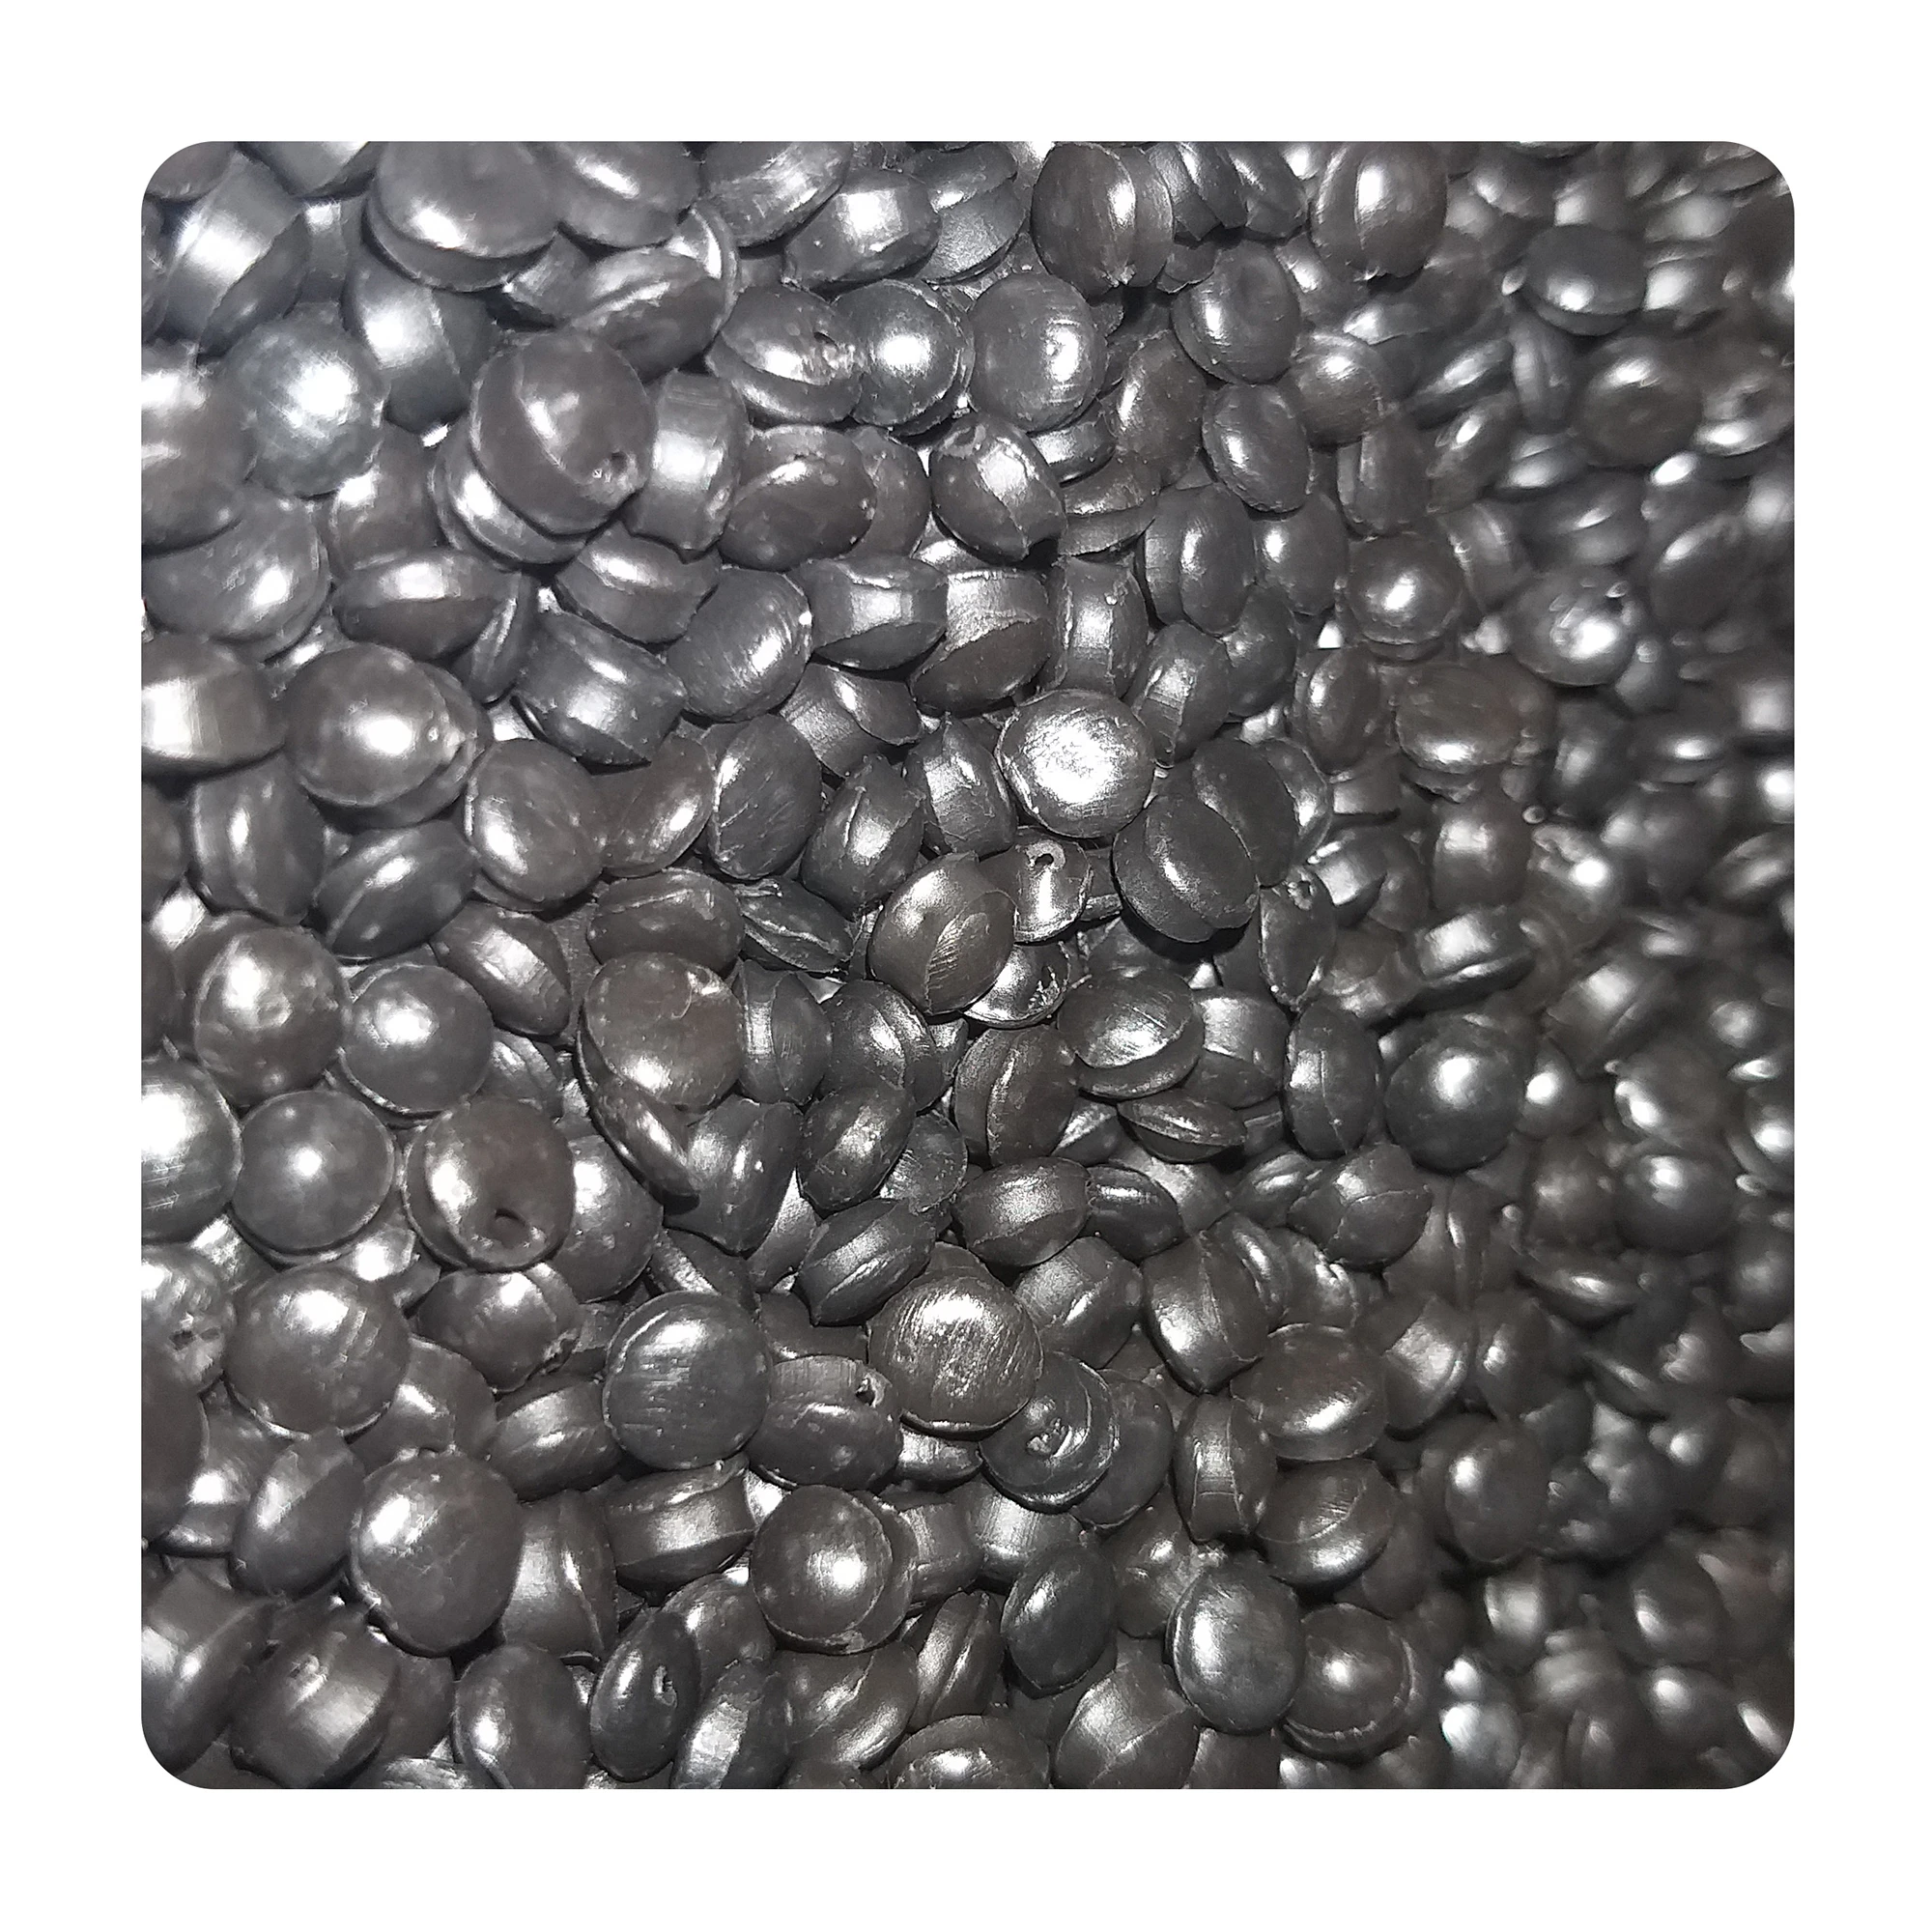 Recycled Secondary Polypropylene (PP) Black Granules, Buy Plastic Raw Materials Wholesale, Factory Directly Provide Top Quality